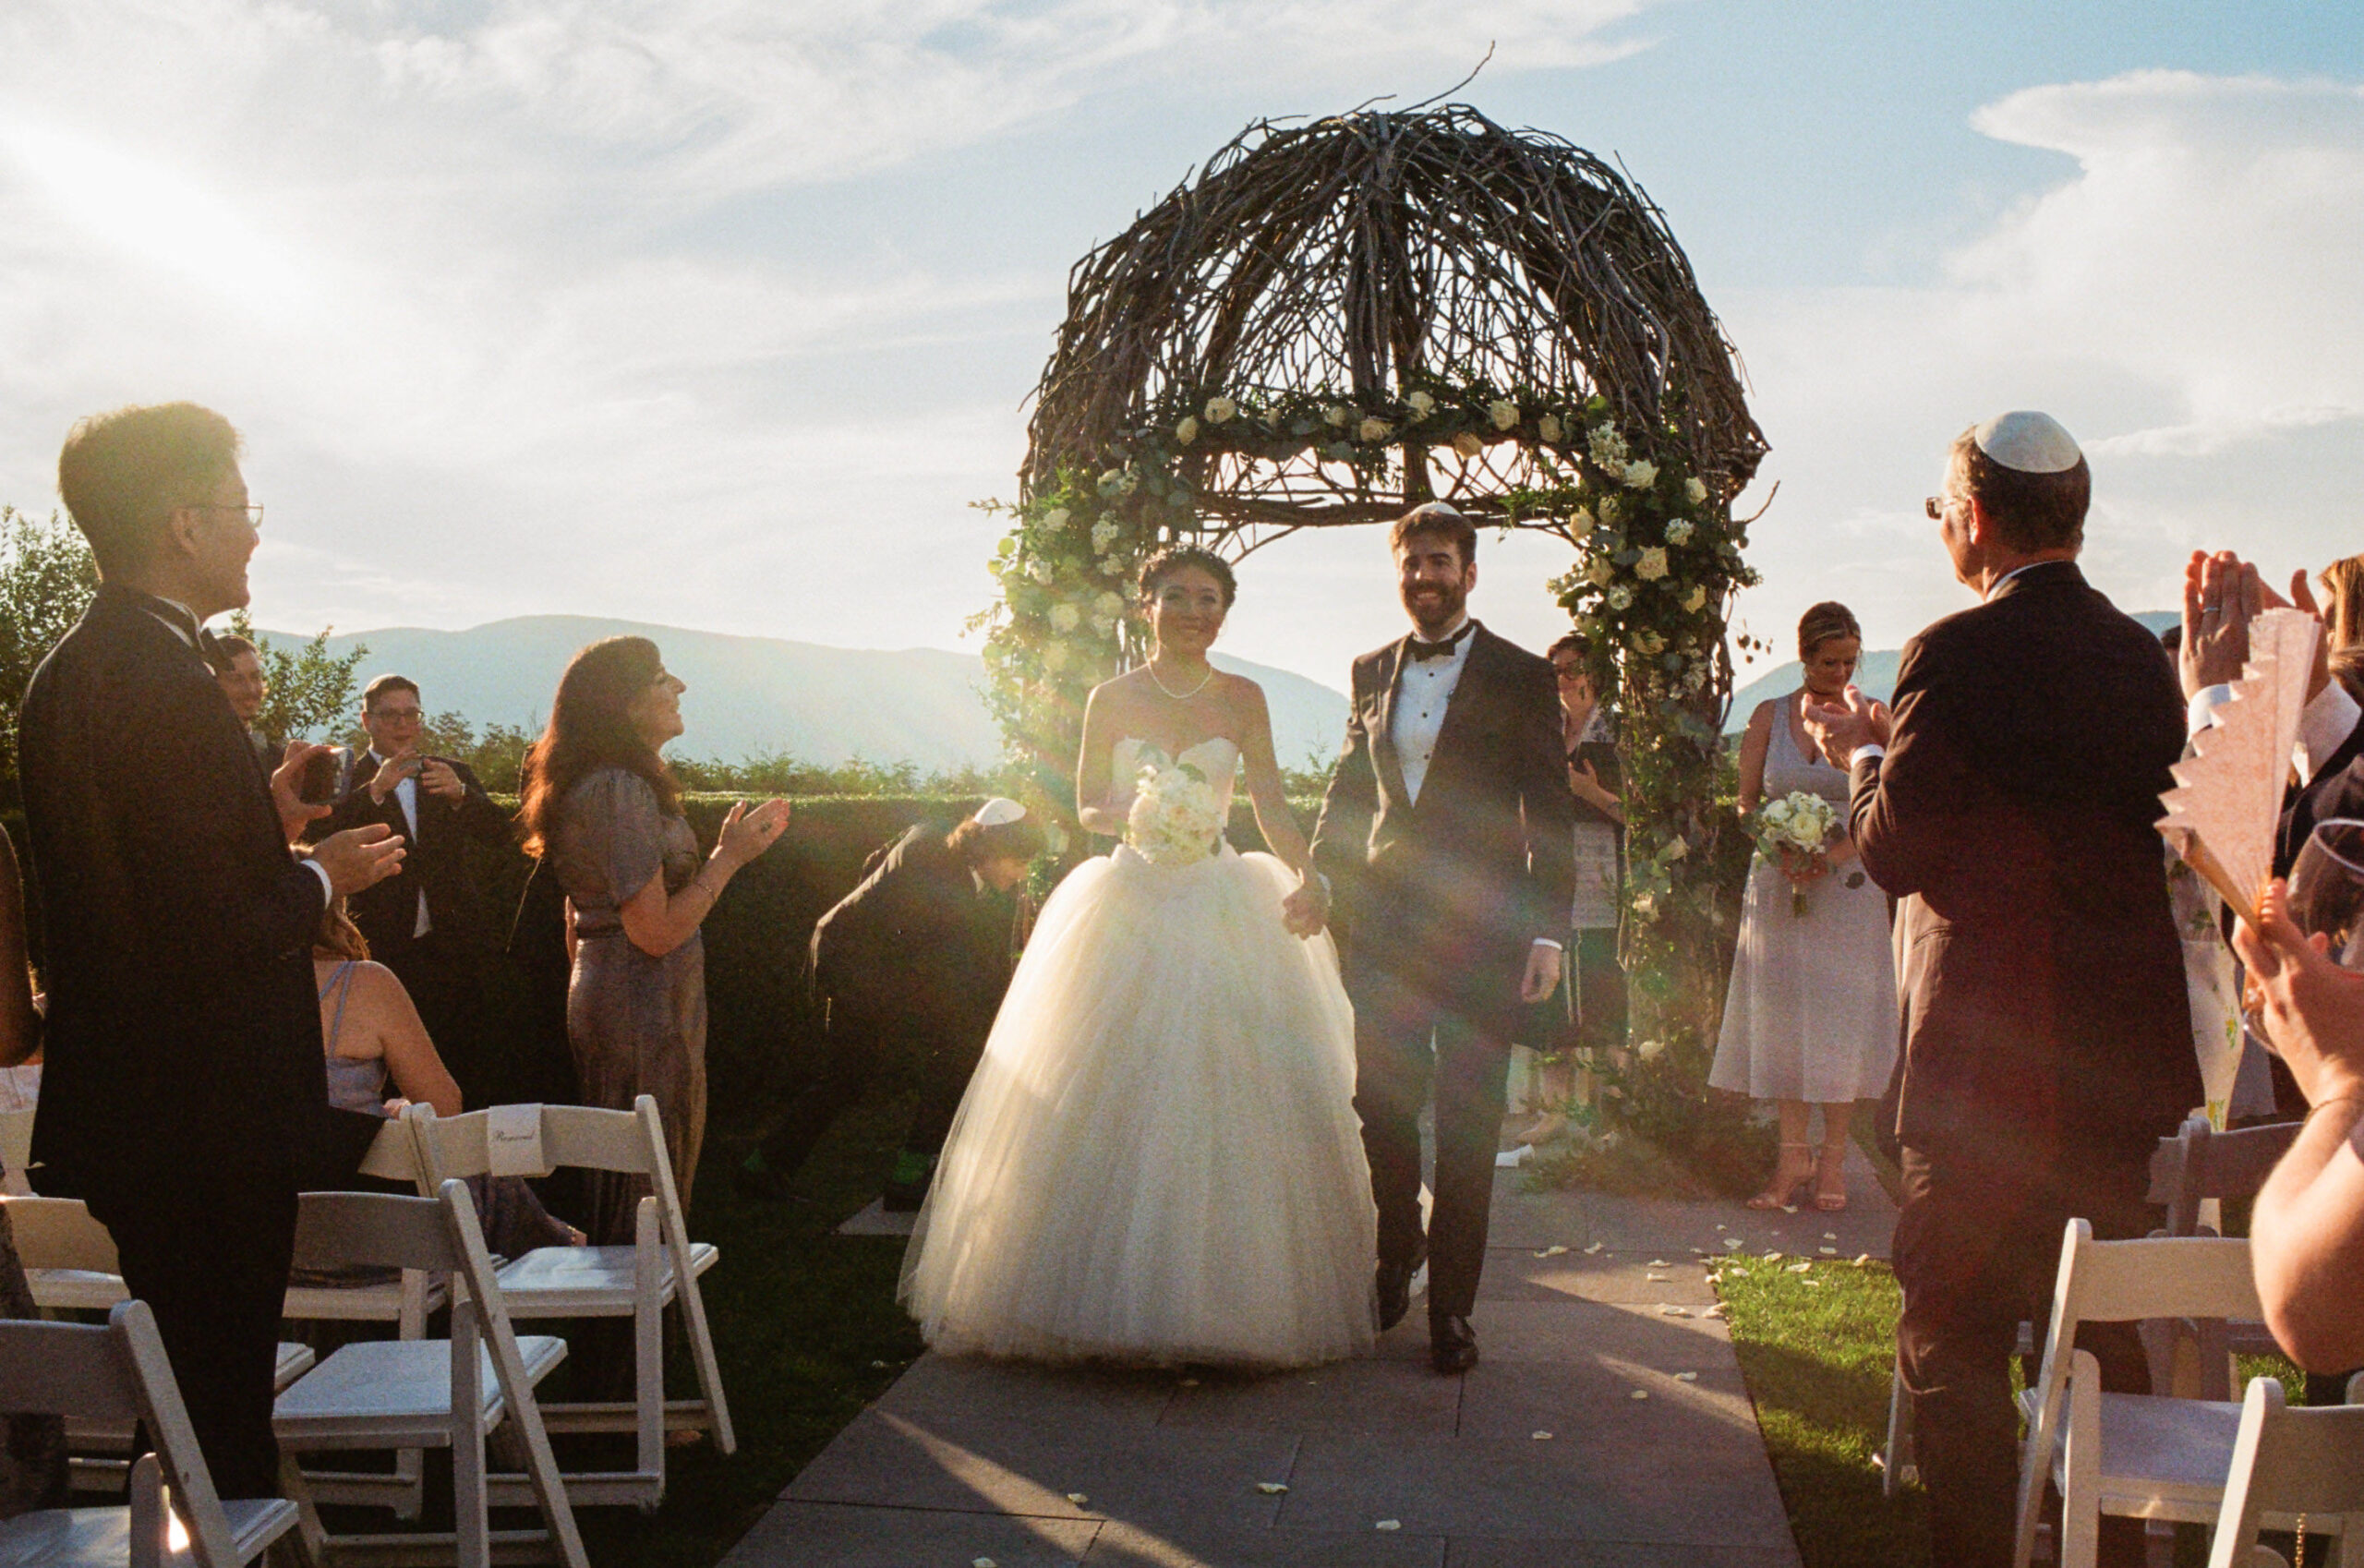 The couple is walking down the aisle after the wedding ceremony. Golden hour photo by Jenny Fu Studio